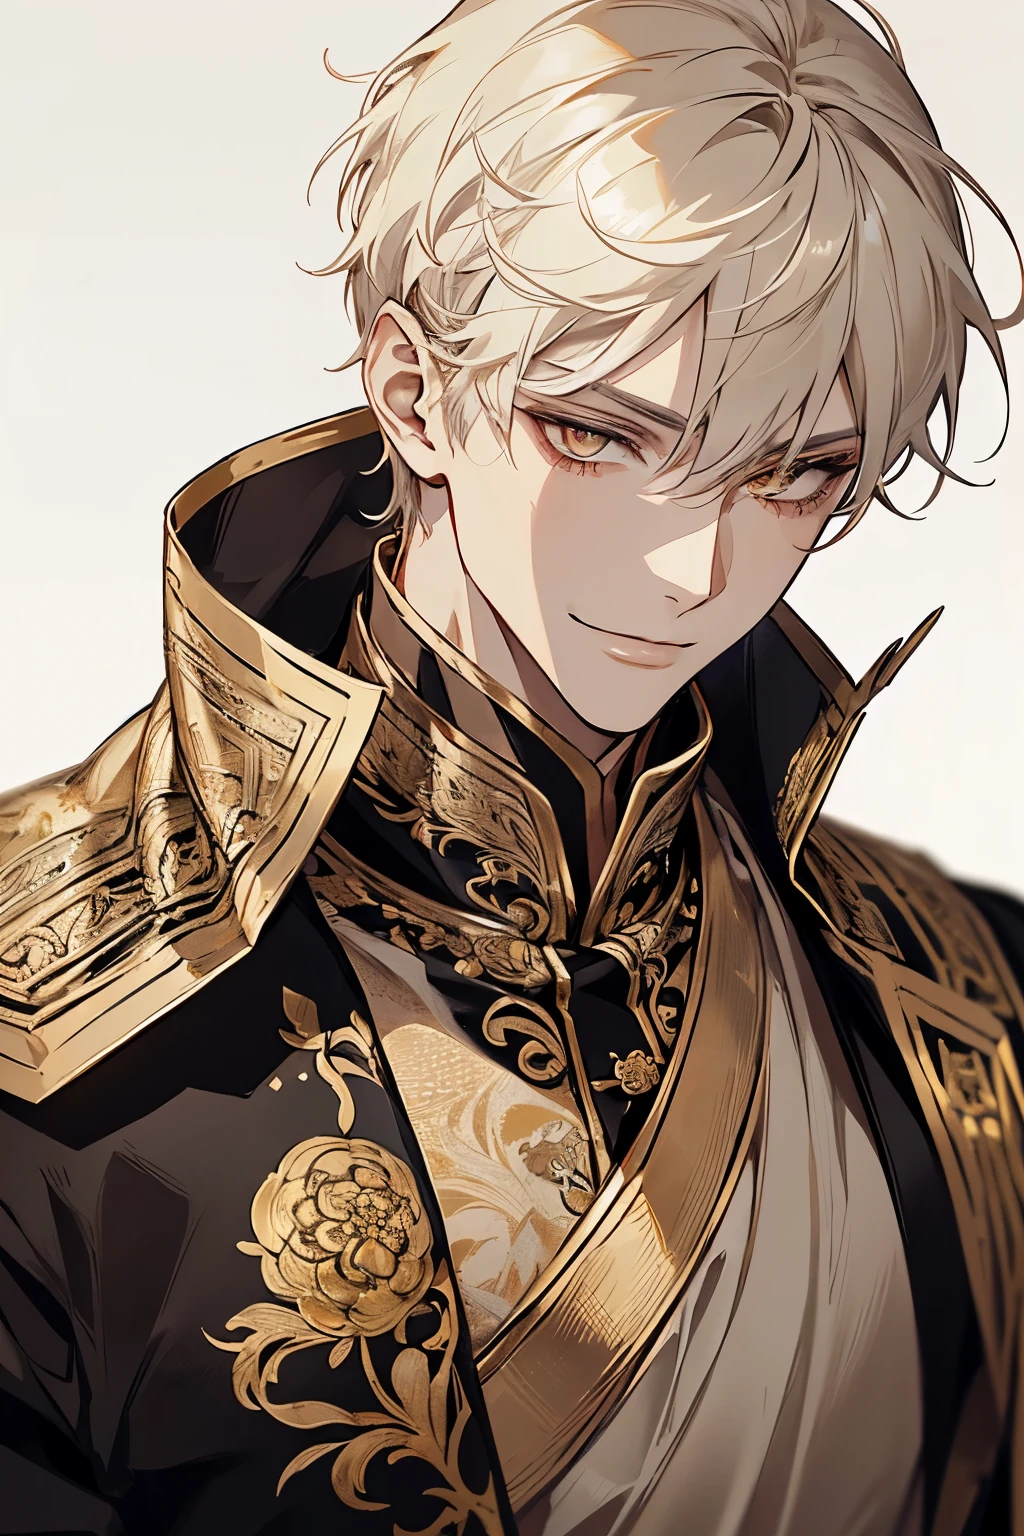 1 male, calm, aldult, Handsome, white short hair, ((golden eyes))，Exquisite facial features details，exquisite eyes, royalties, prince, Wearing black Chinese style clothing，There are gold embroideries on the clothes, Chinese classical palaces, aldult face, close up, Indifferent smile，mild